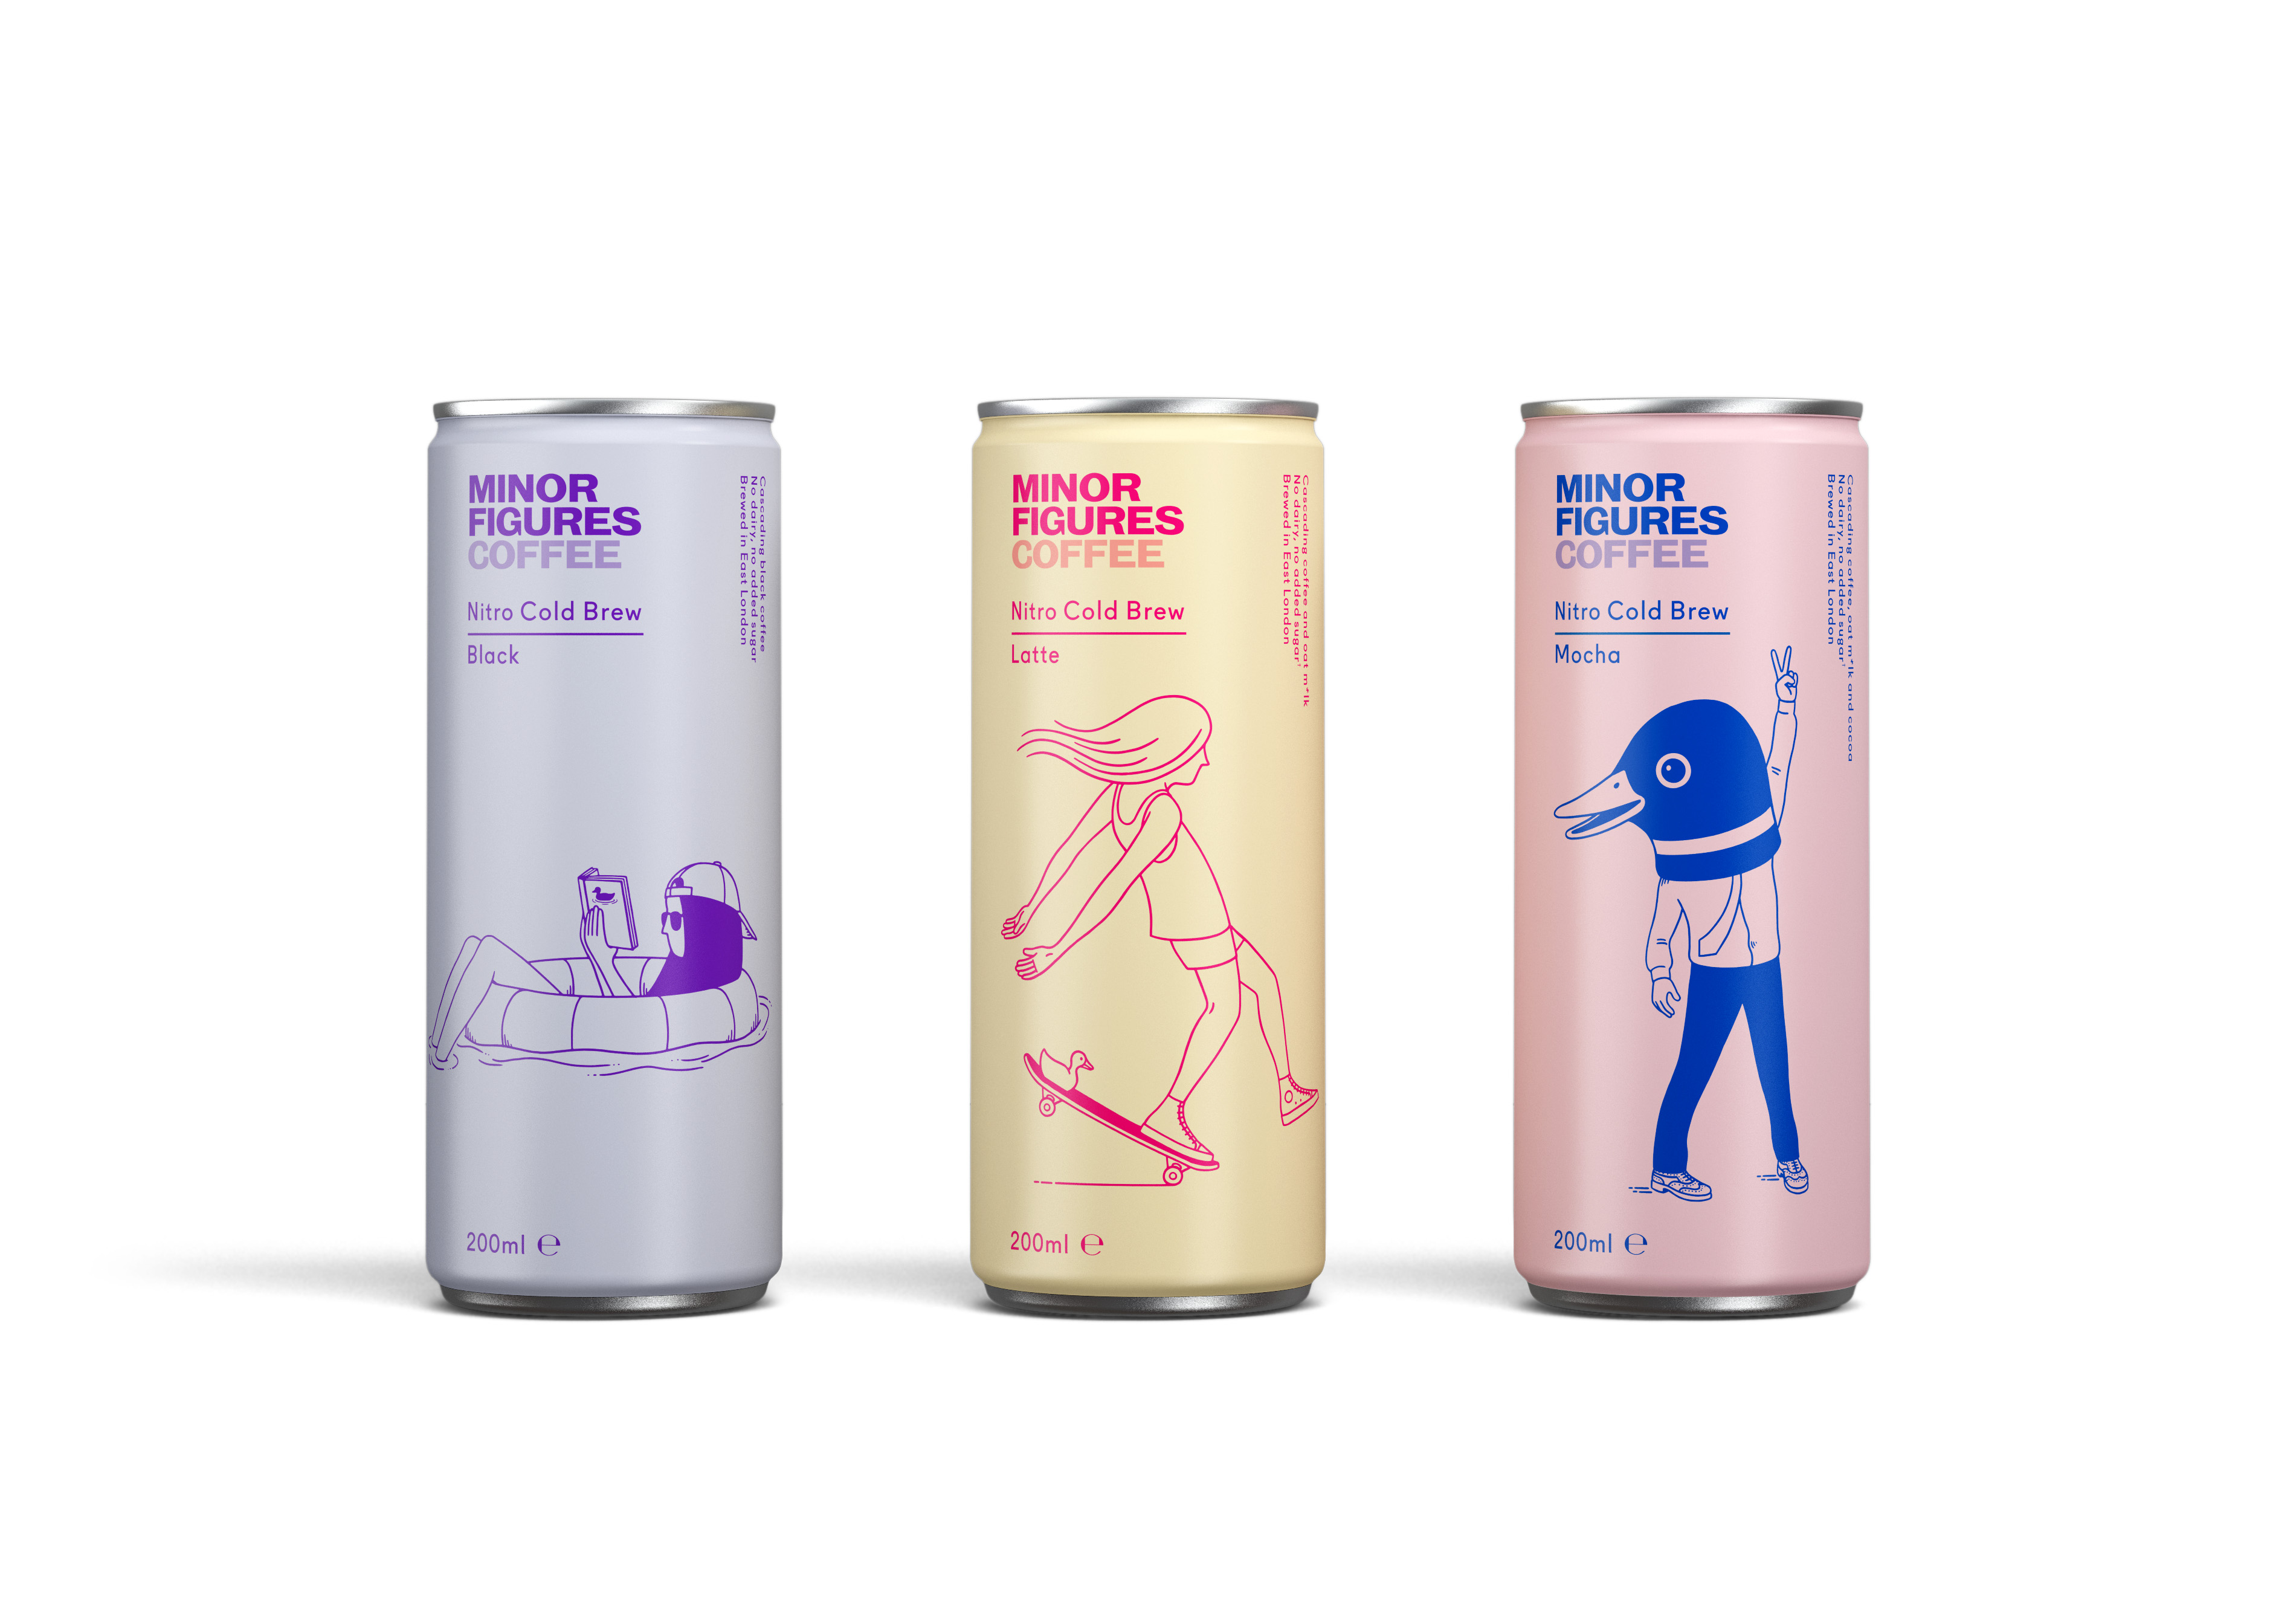 https://www.beveragedaily.com/var/wrbm_gb_food_pharma/storage/images/publications/food-beverage-nutrition/beveragedaily.com/news/processing-packaging/minor-figures-redesigns-nitro-cold-brew-coffee-cans/7953203-1-eng-GB/Minor-Figures-redesigns-nitro-cold-brew-coffee-cans.jpg